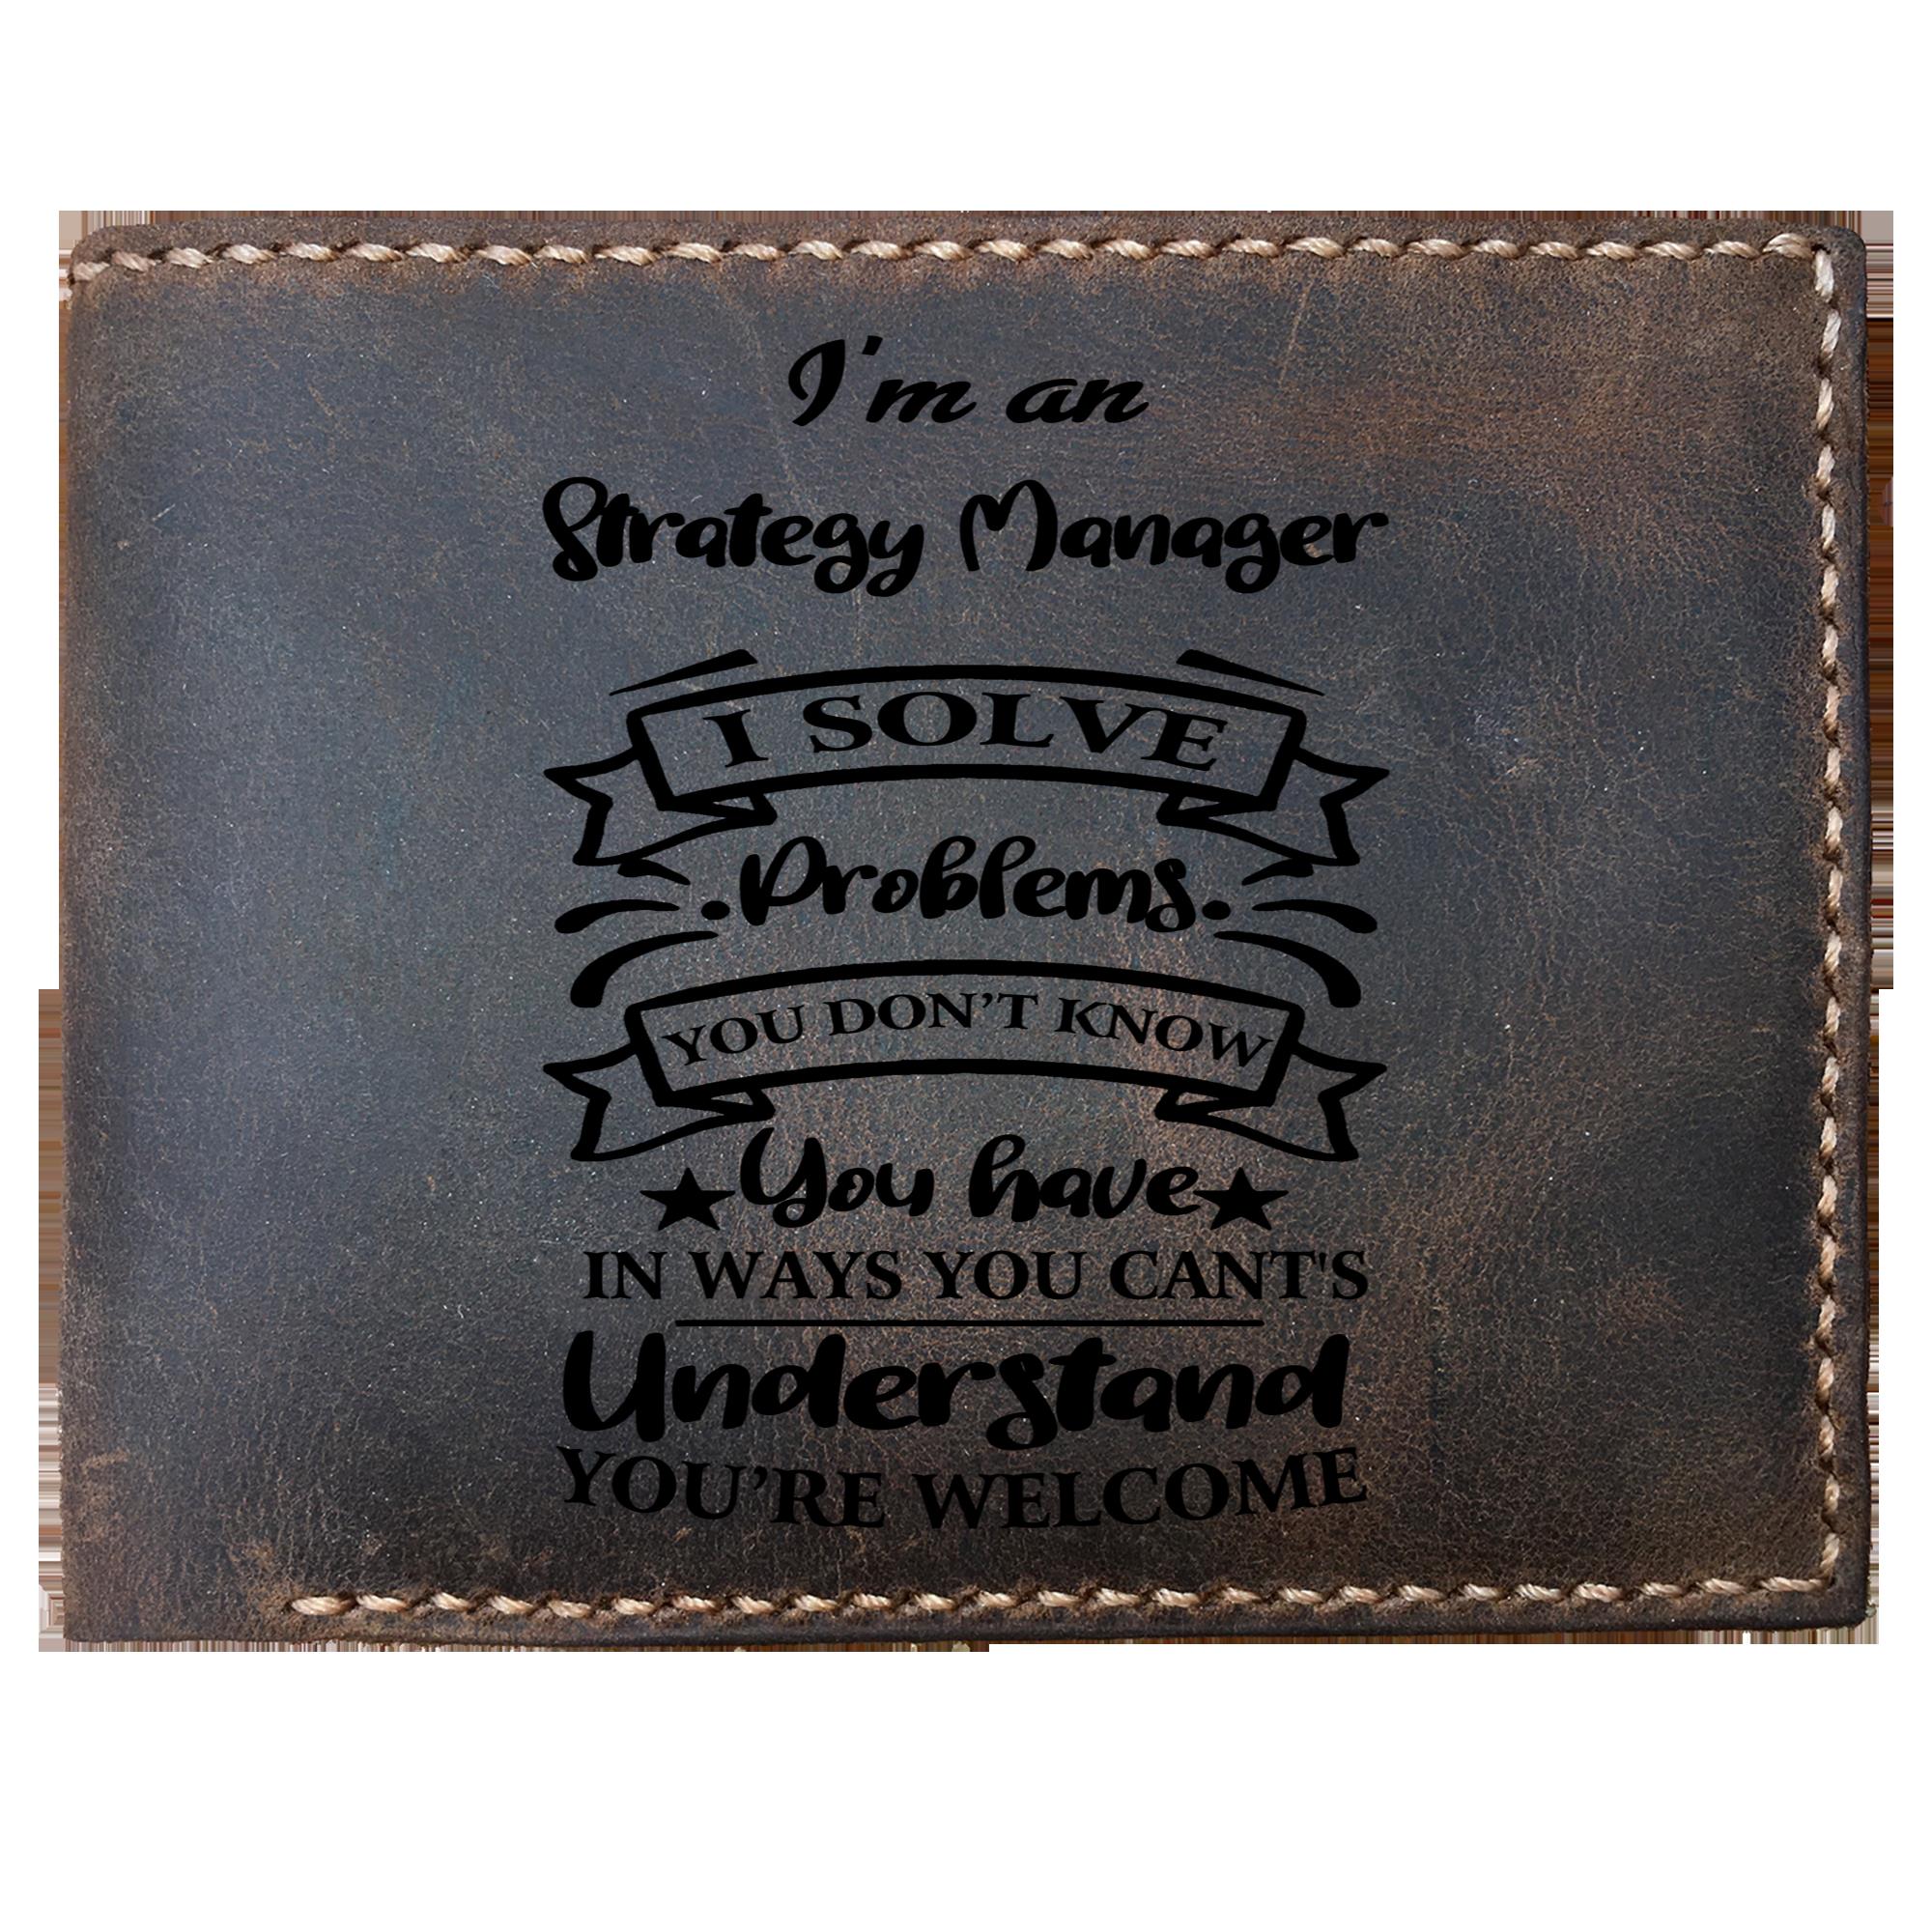 Skitongifts Funny Custom Laser Engraved Bifold Leather Wallet For Men, I'm an Strategy Manager Solve Problems, Father's Day Gifts